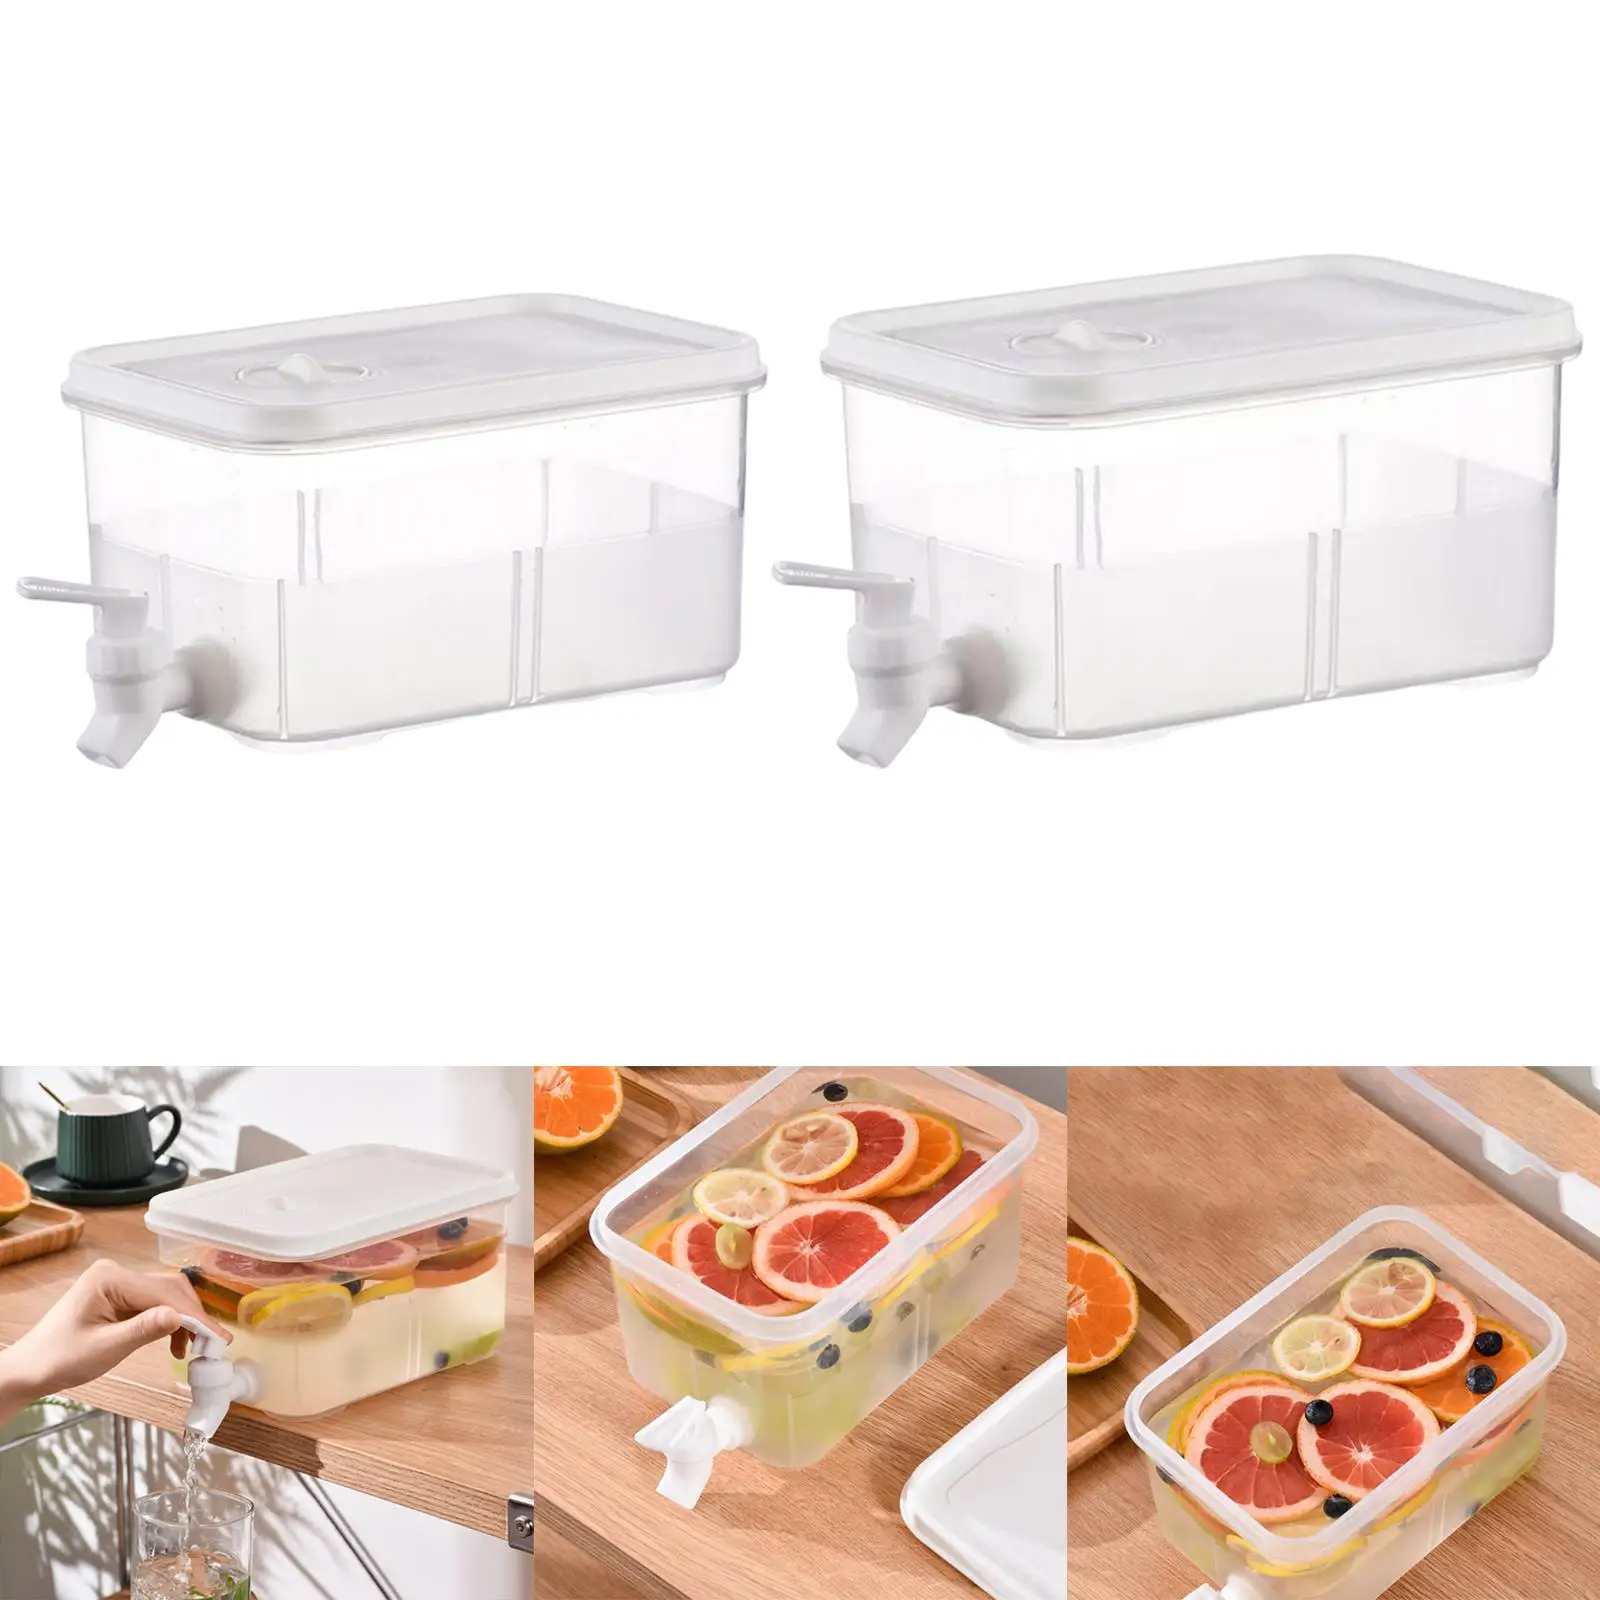 Transparent Cool Water Bucket with Tap Kitchen Gadgets for Parties Outdoor